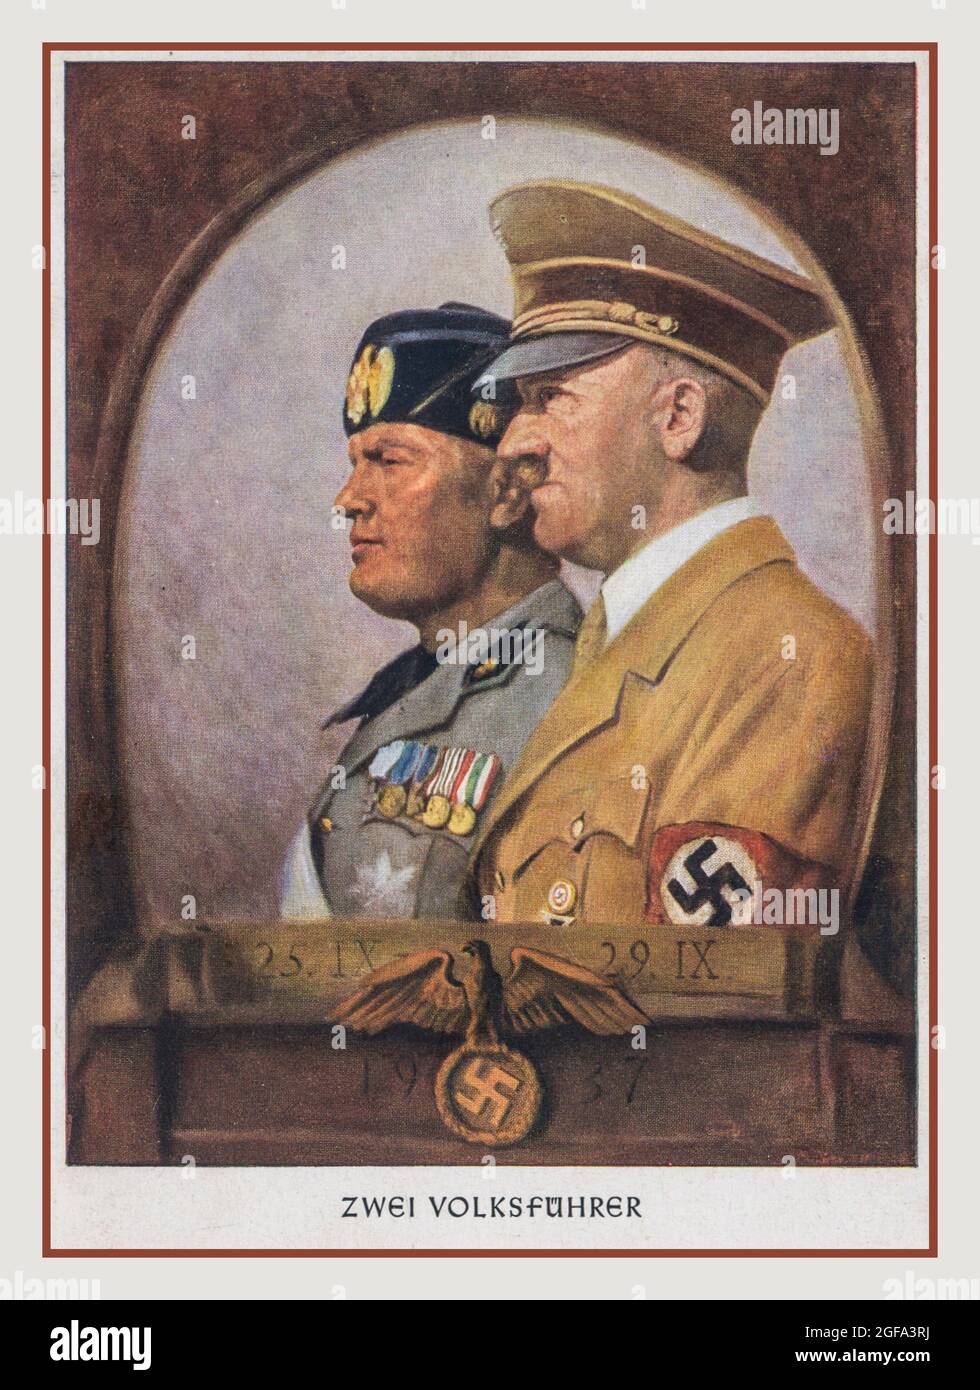 NAZI PROPAGANDA ZWEI VOLKSFUHRER ( Two Leaders) Adolf Hitler and Benito Mussolini 1937 Axis Alliance Italy & Germany Propaganda Poster Artwork Card with swastika armband and crest symbol Stock Photo